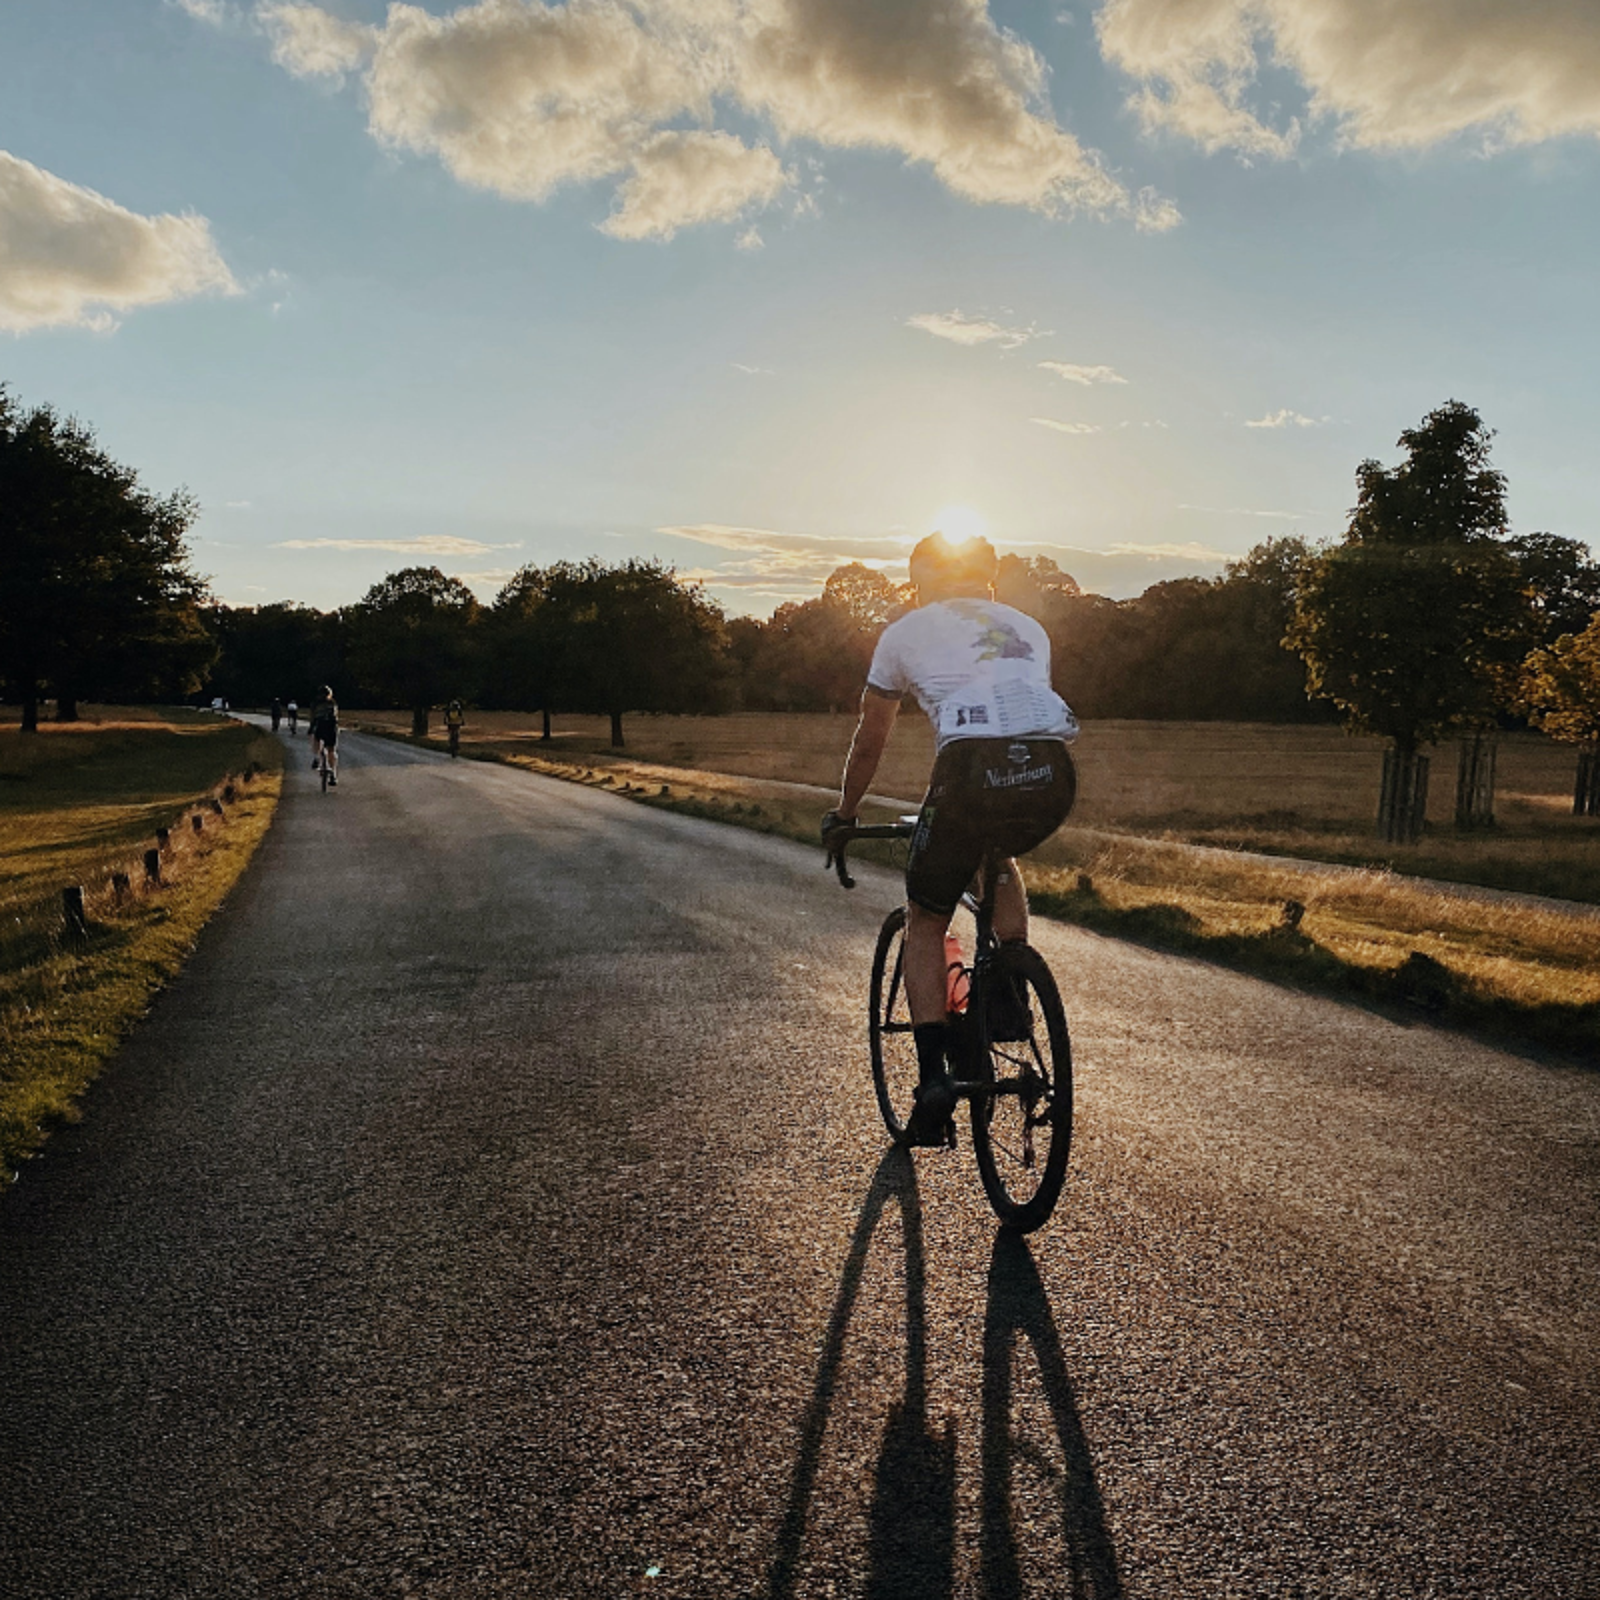 Man on a road bike cycling along road towards a sunset